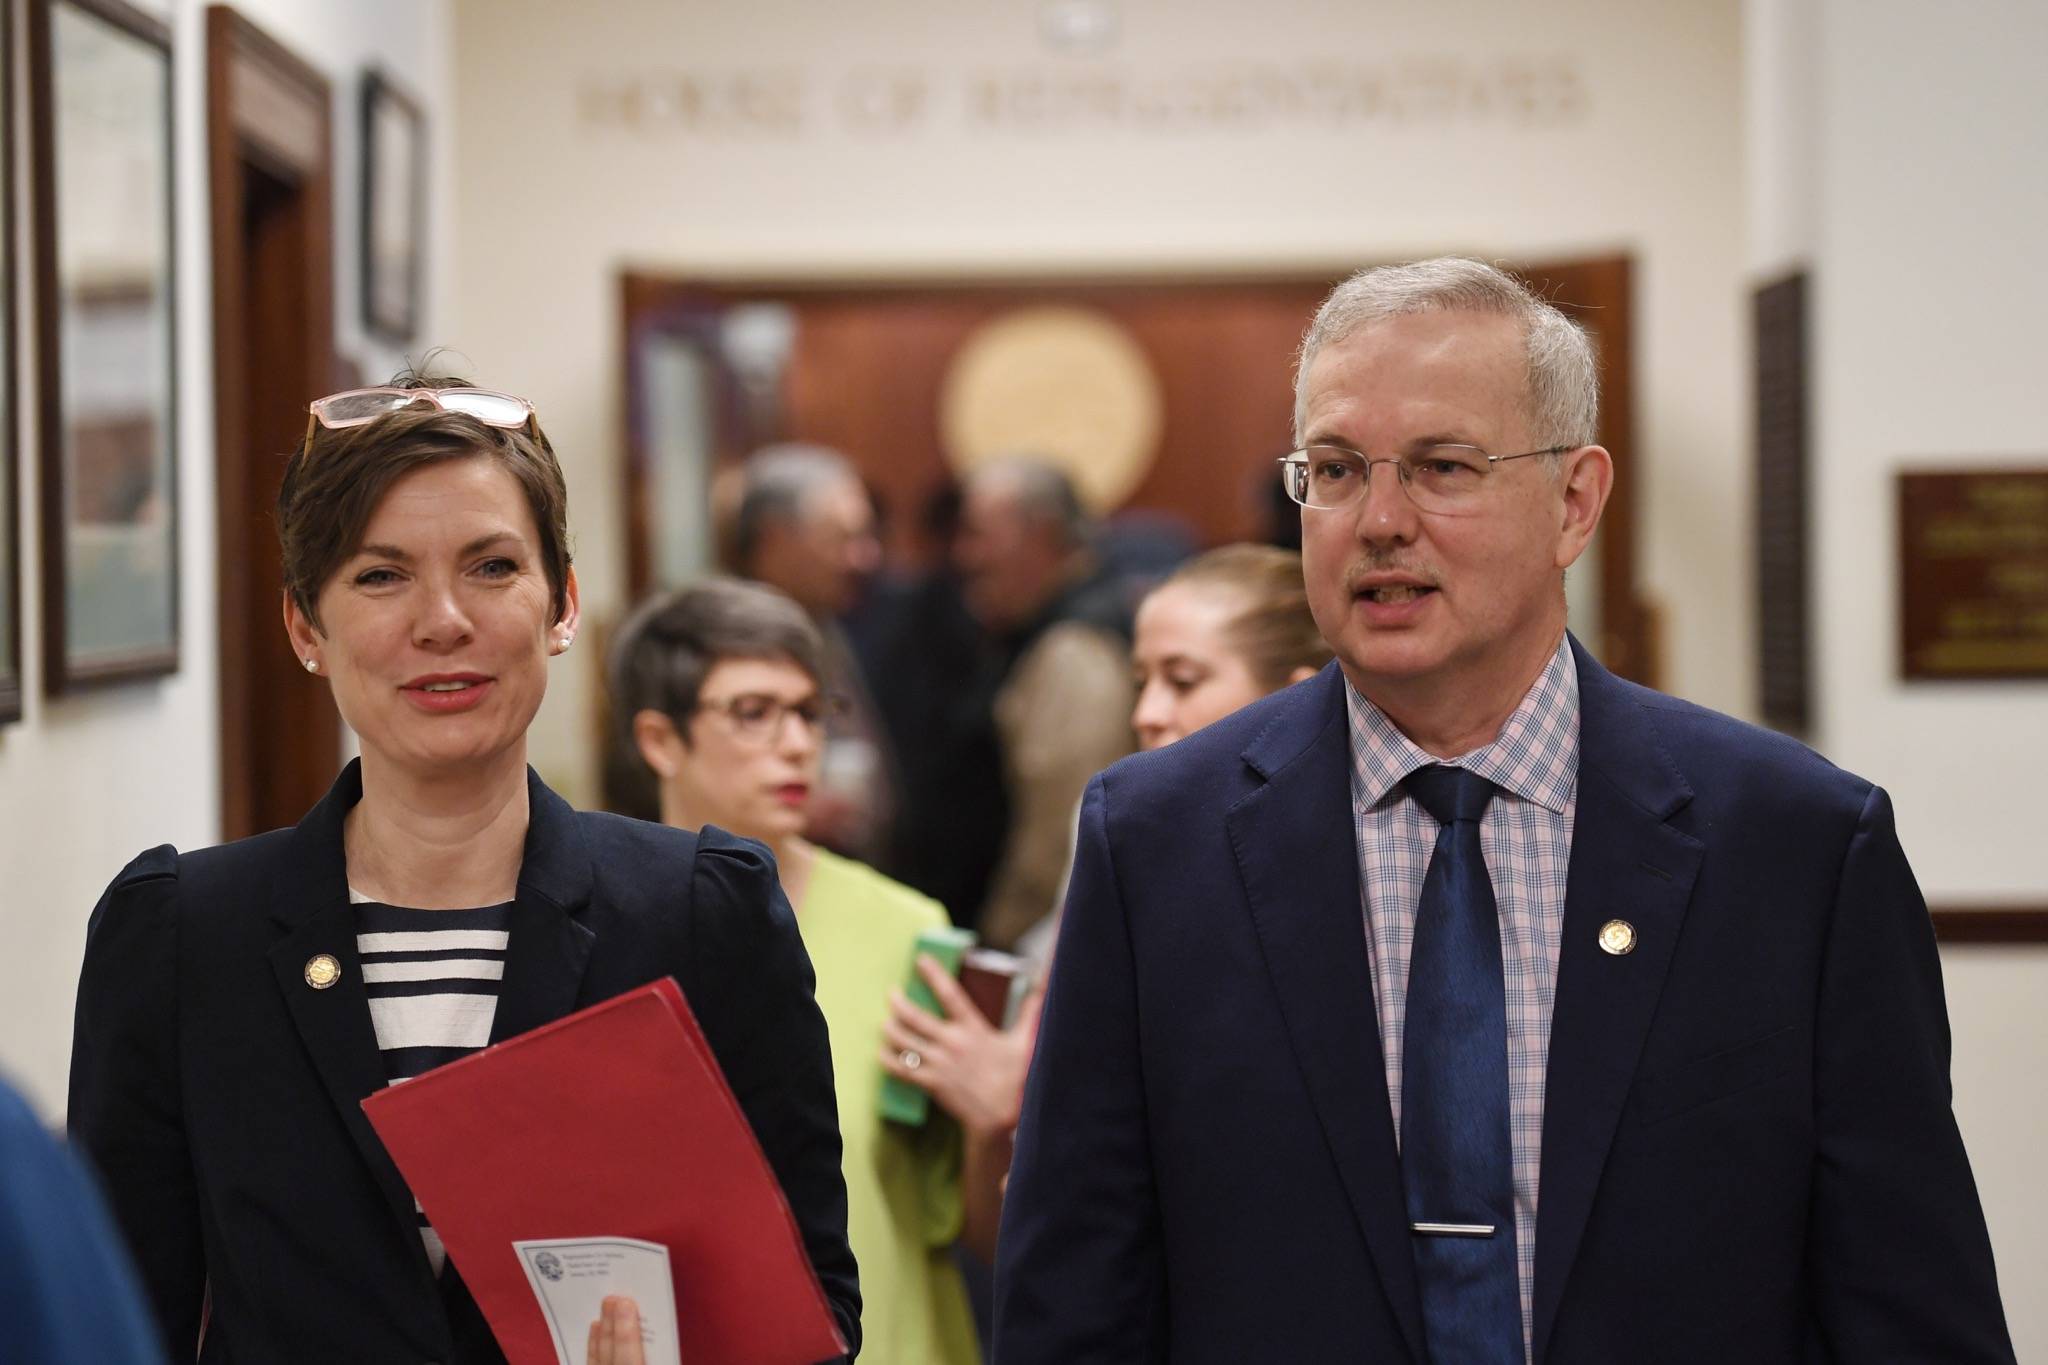 Rep. Ivy Spohnholz, D-Anchorage, walks with Speaker of the House Bryce Edgmon, I-Dillingham, as the House takes an at ease to wait for the conference committee on the crime bill to take place at the Capitol on Thursday, May 16, 2019. (Michael Penn | Juneau Empire)